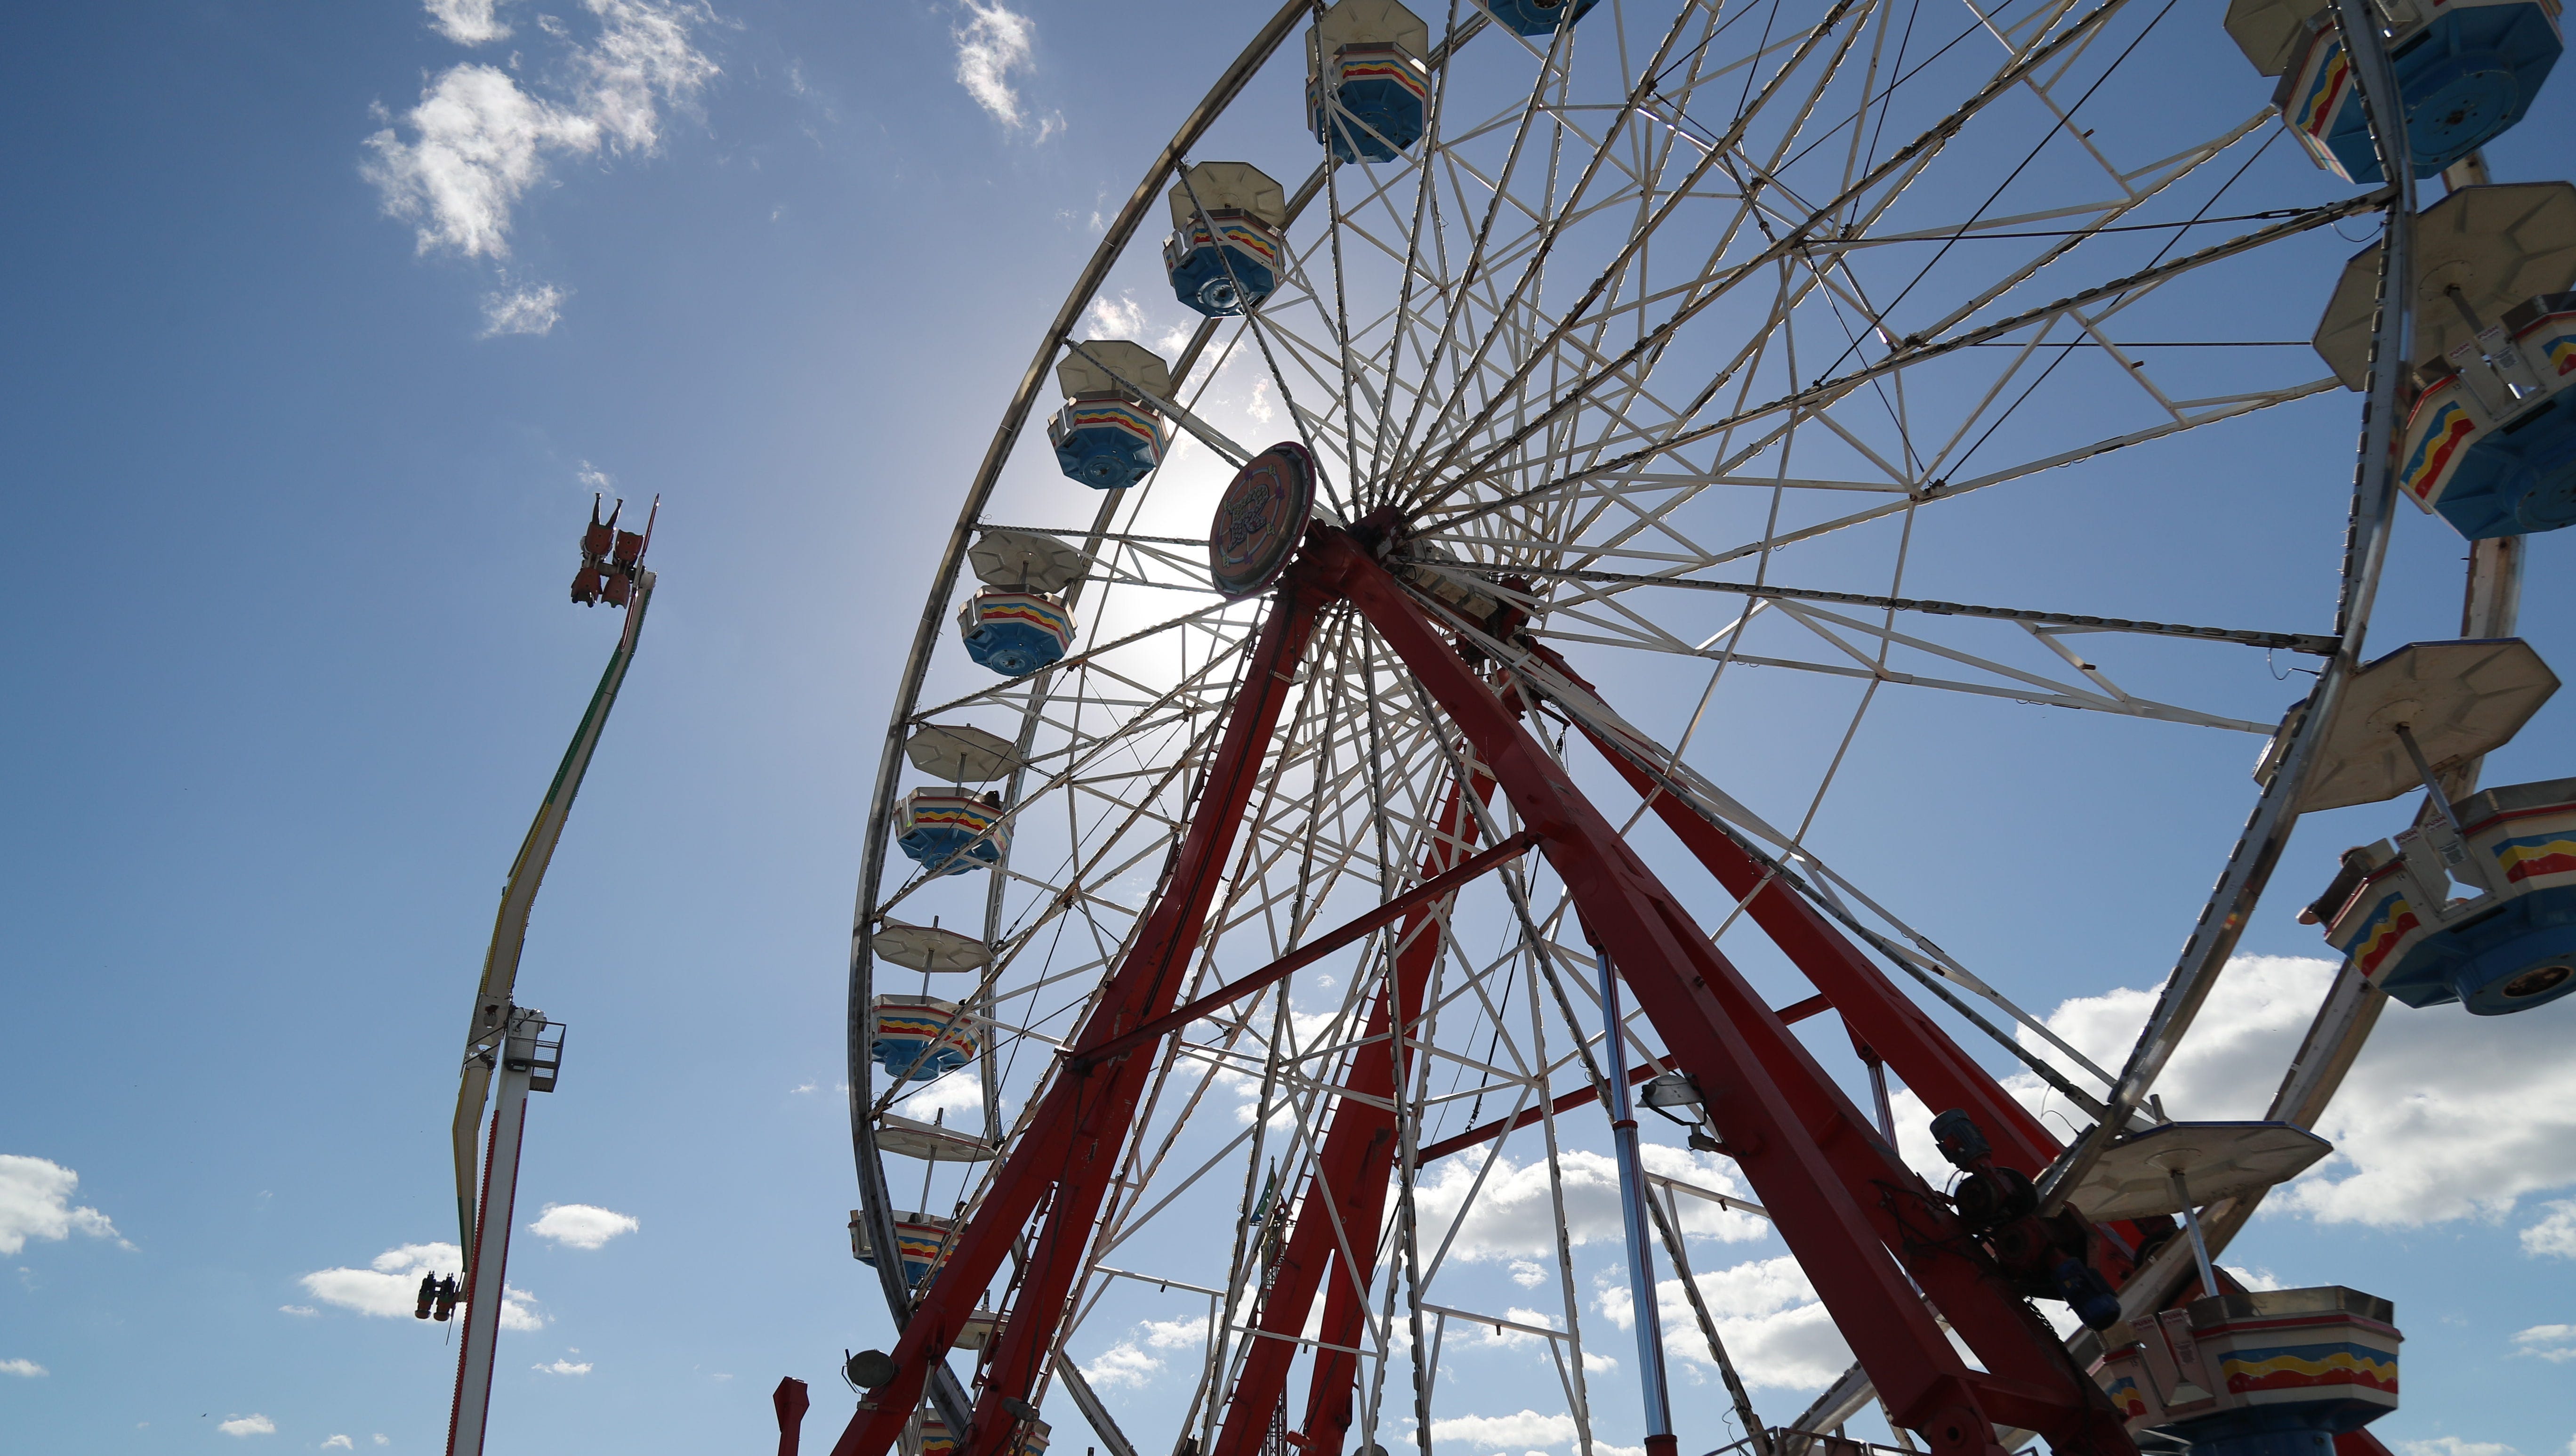 Things to do in Fort Myers, Cape Coral: Lee County Fair, Reading Festival,  etc.